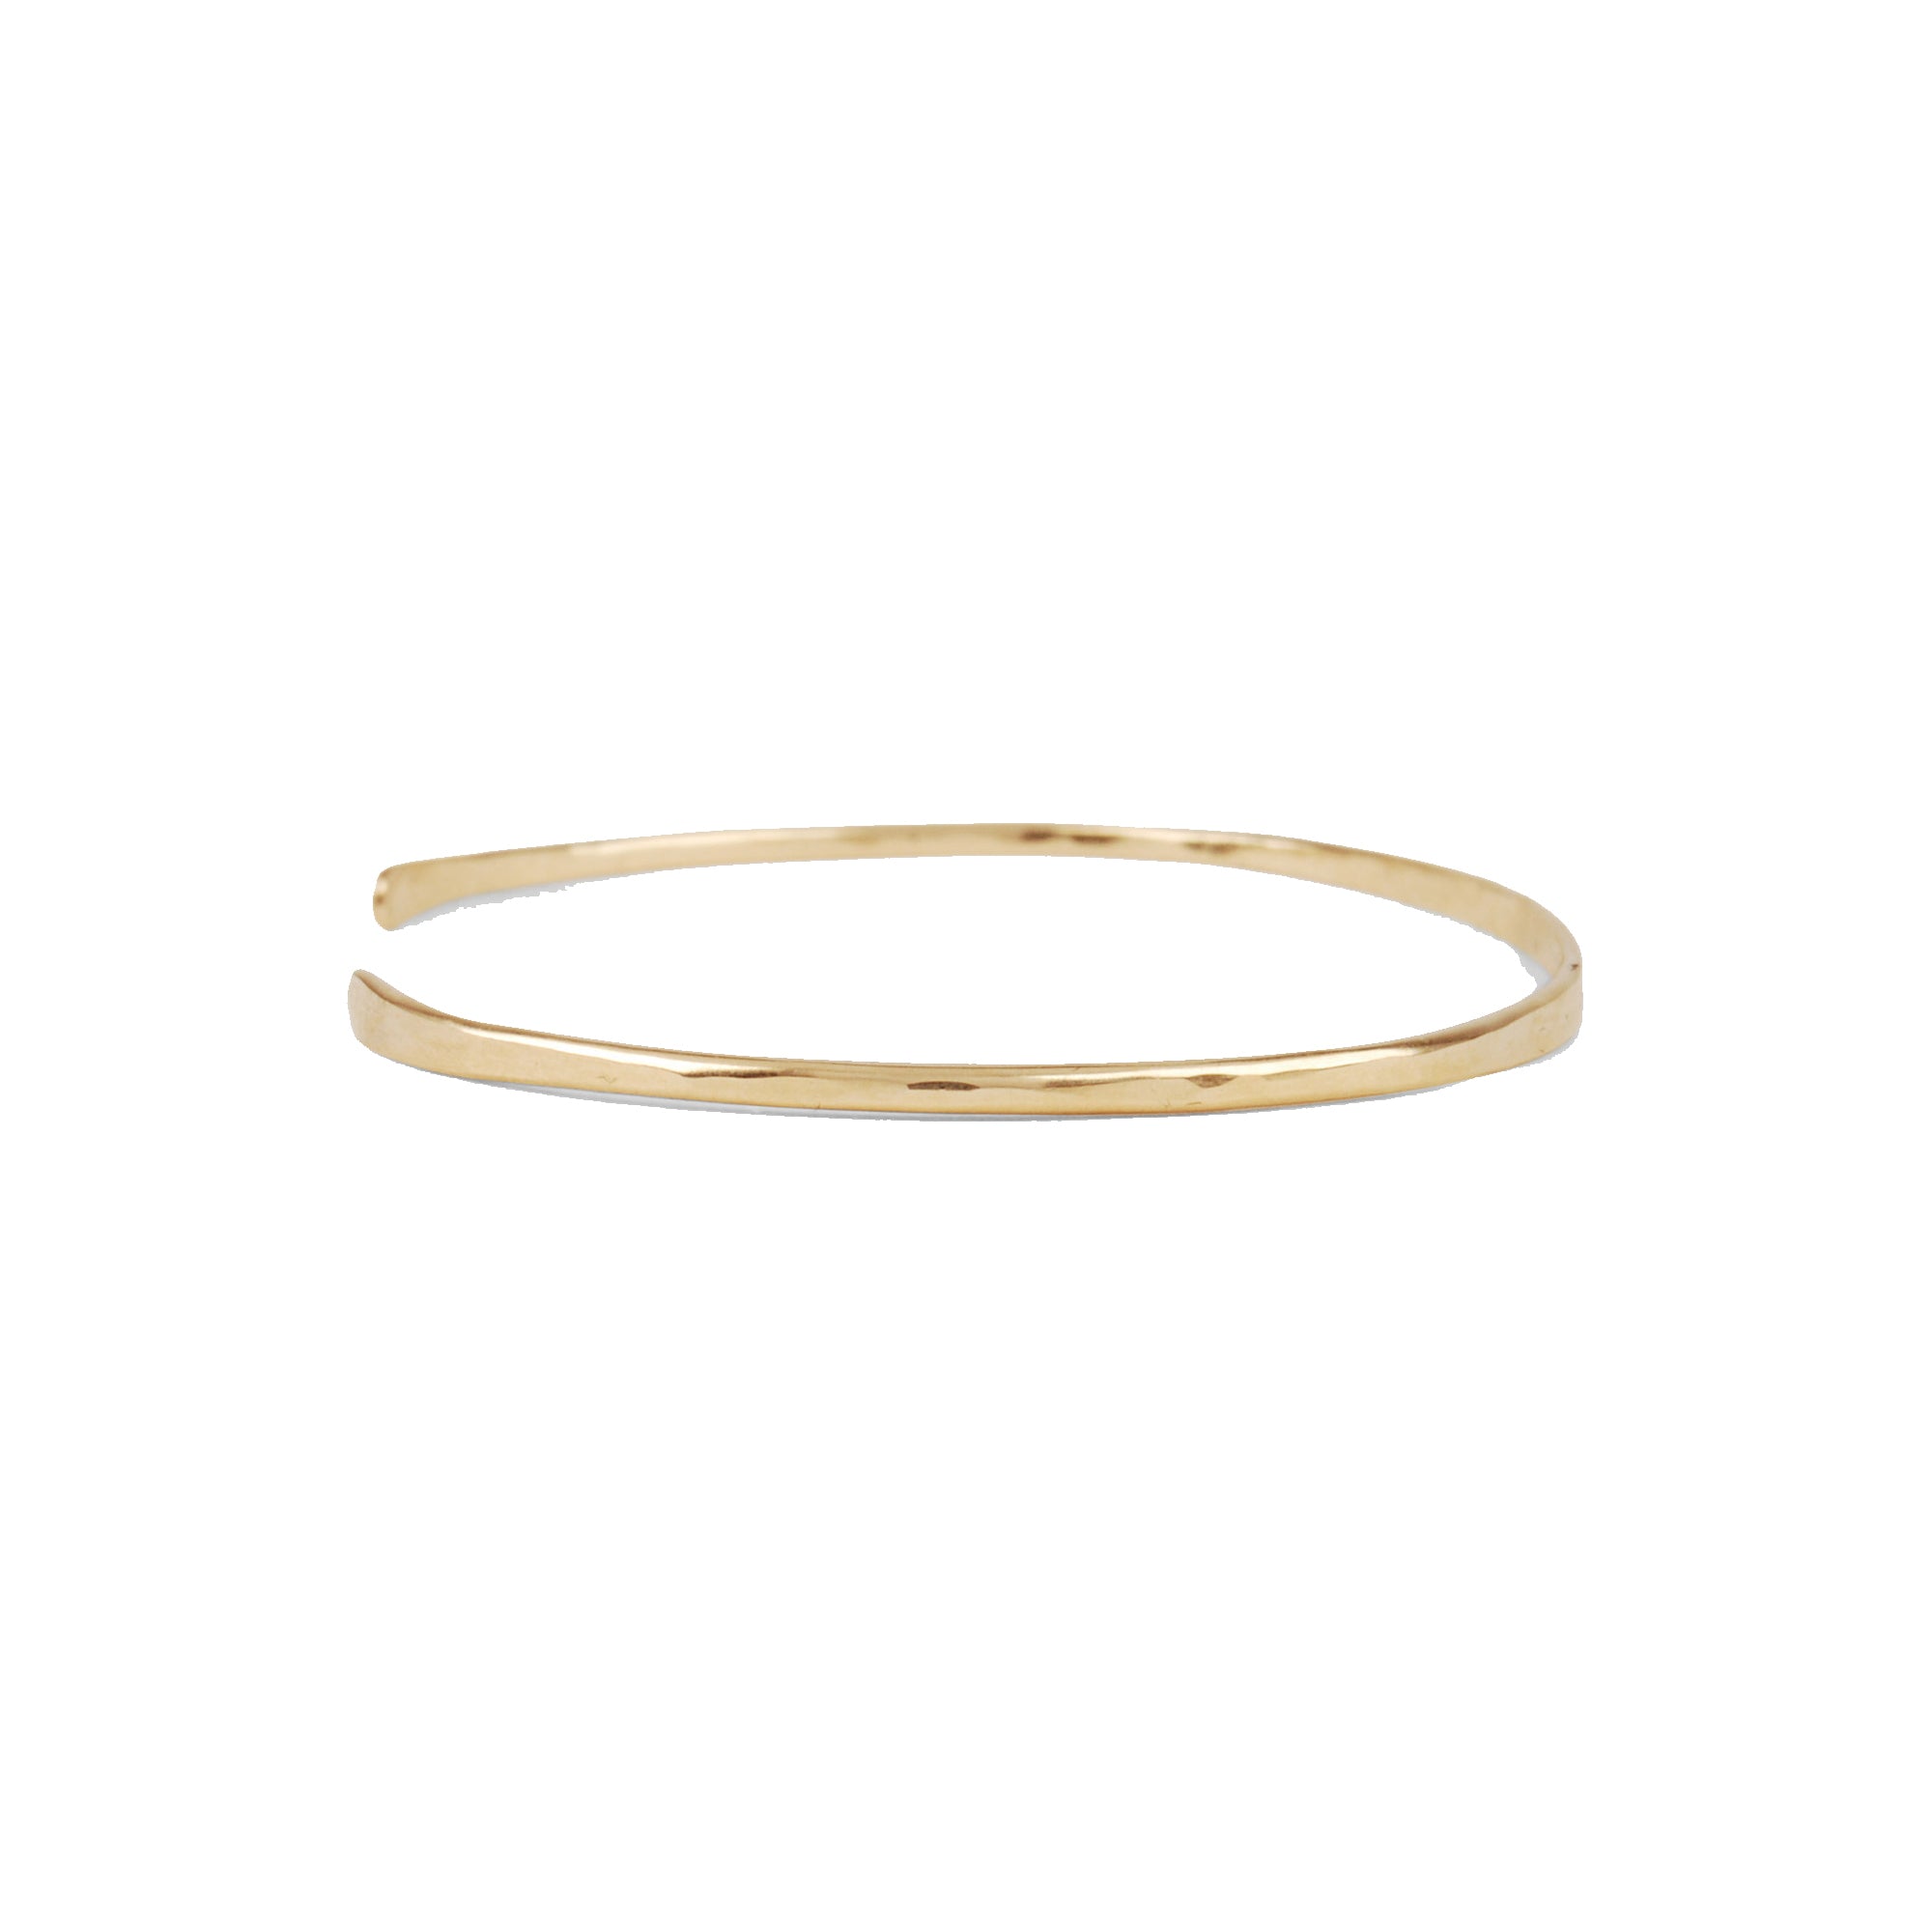 14k gold Thin Cuff, hand-forged and hammered, this modern cuff fits snugly around the curve of your wrist. 